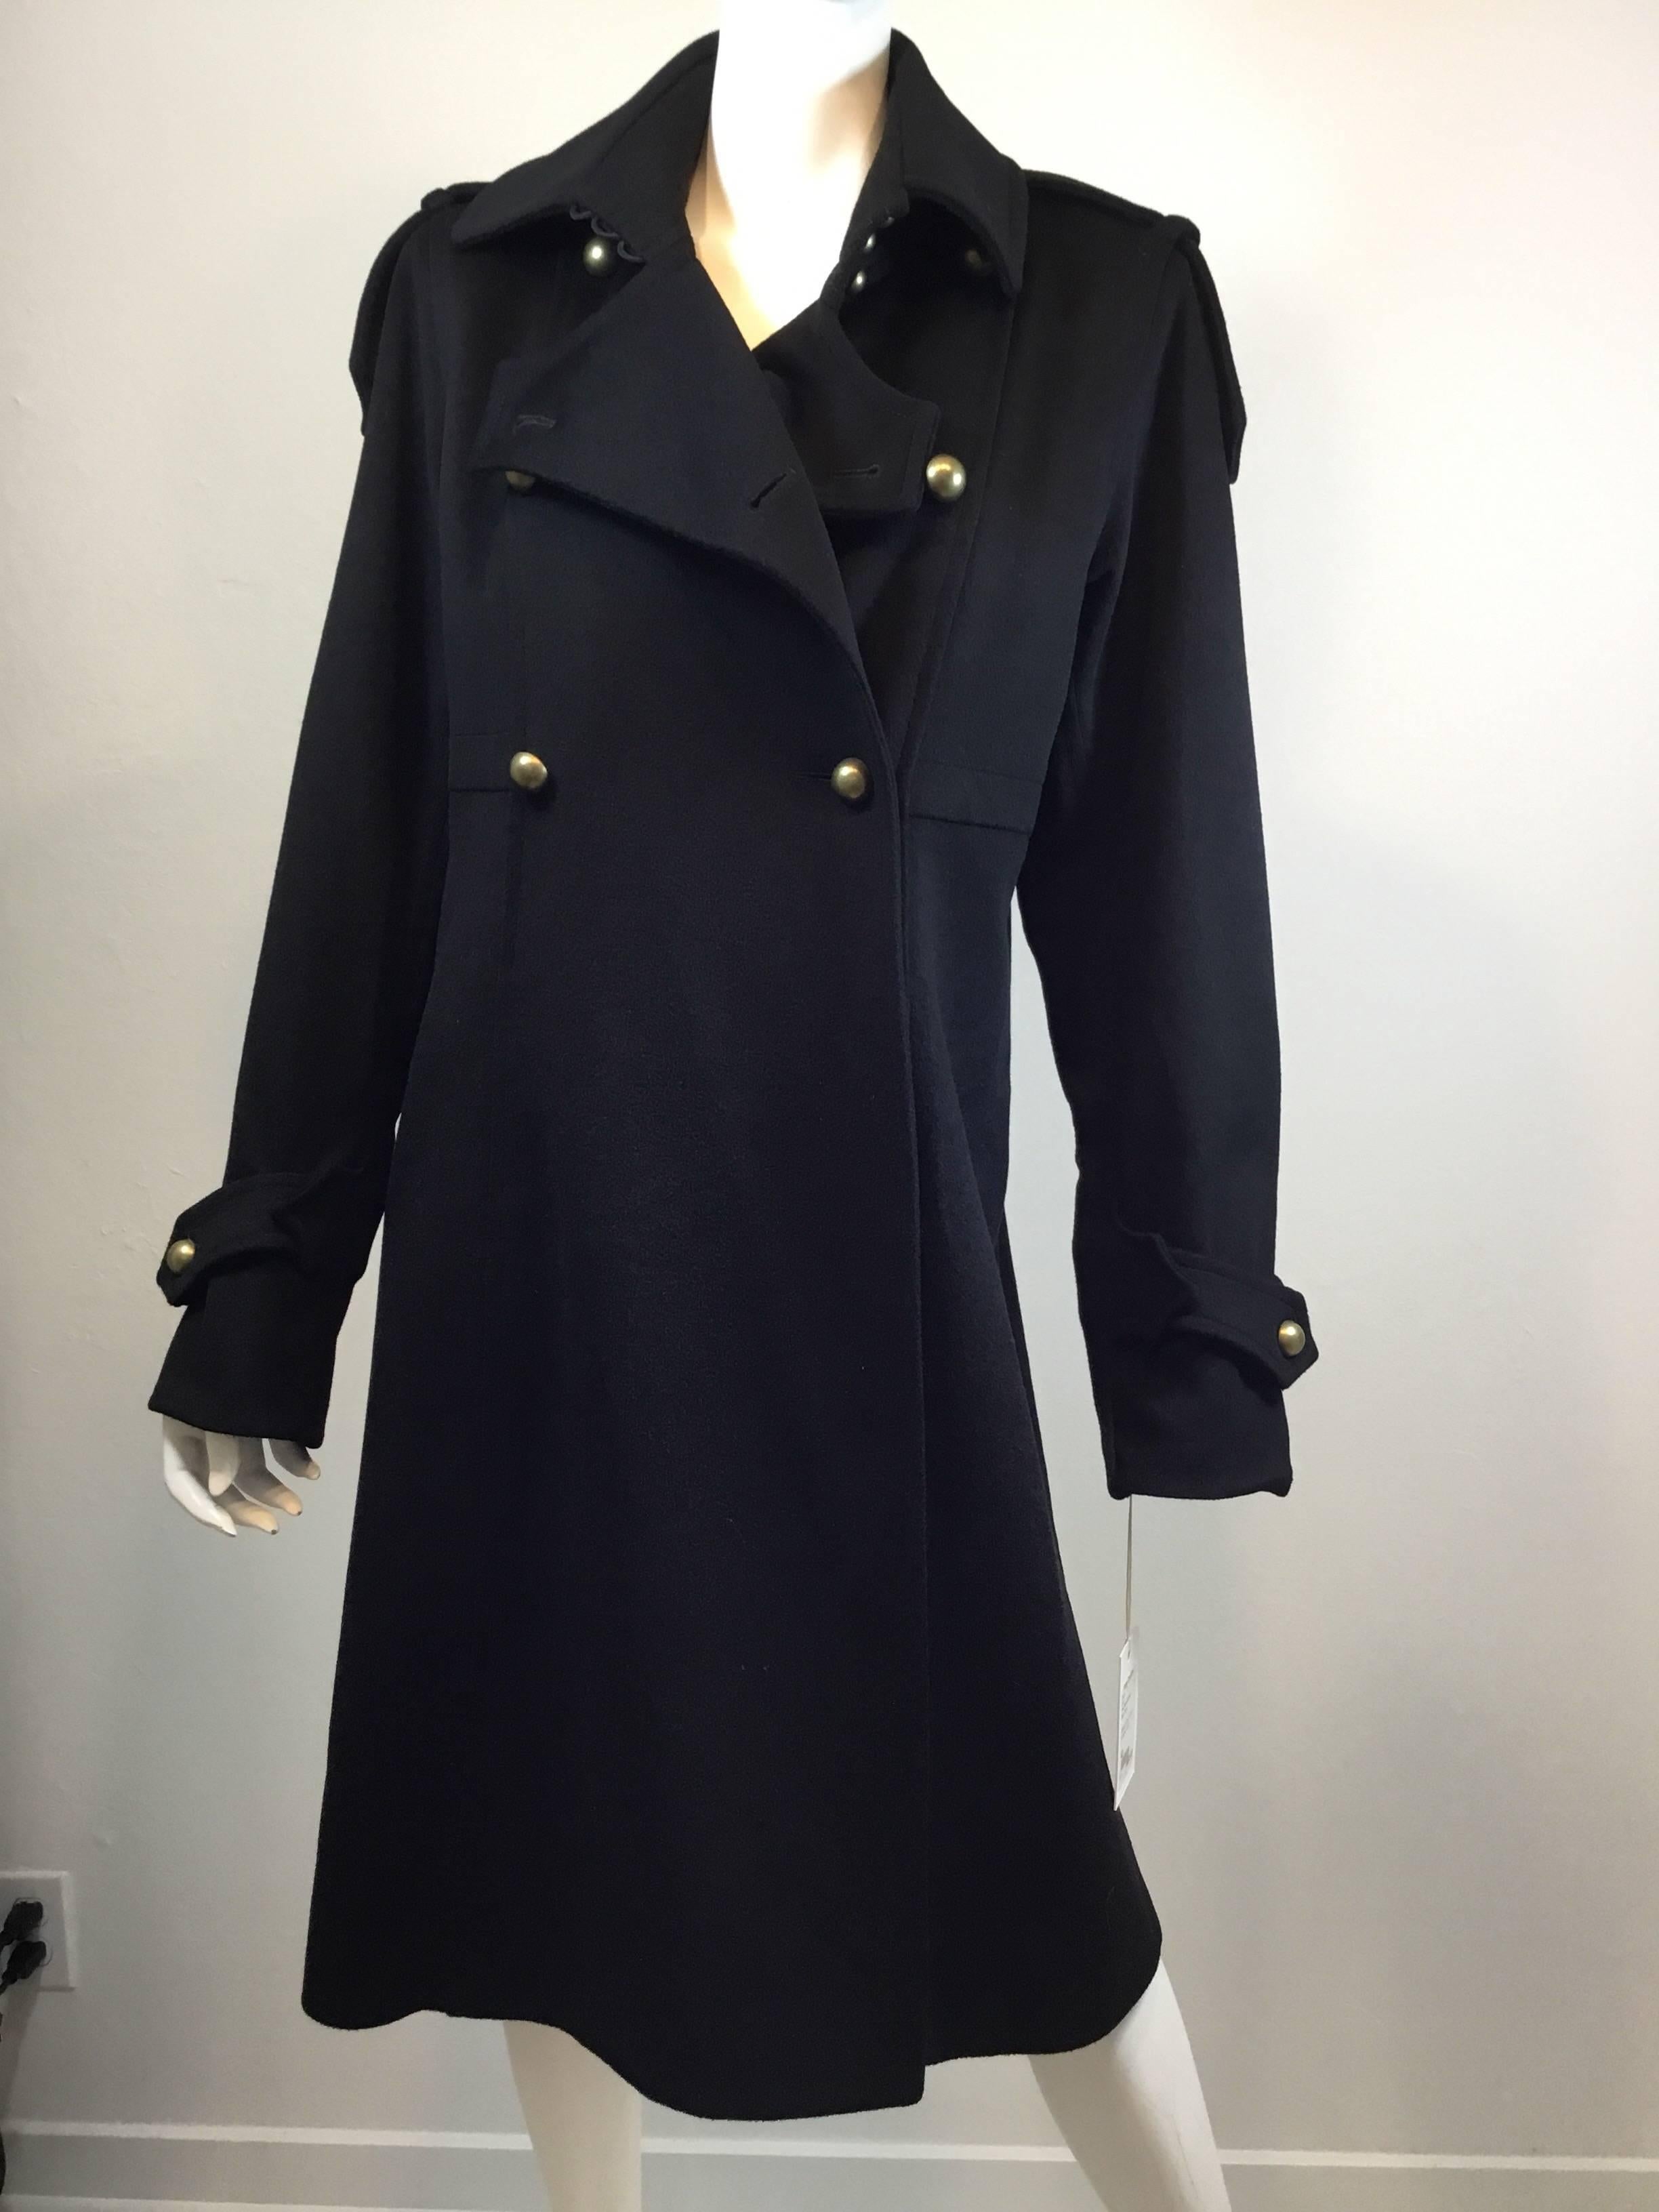 Yves Saint Laurent Rive Gauche wool coat in a classic military style. Epaulettes, gold buttons, double breasted, welted seams, fully lined, front pockets. Perfect to keep you warm and stylish. Made in France of 100% wool. Size 42 or US 8. Excellent